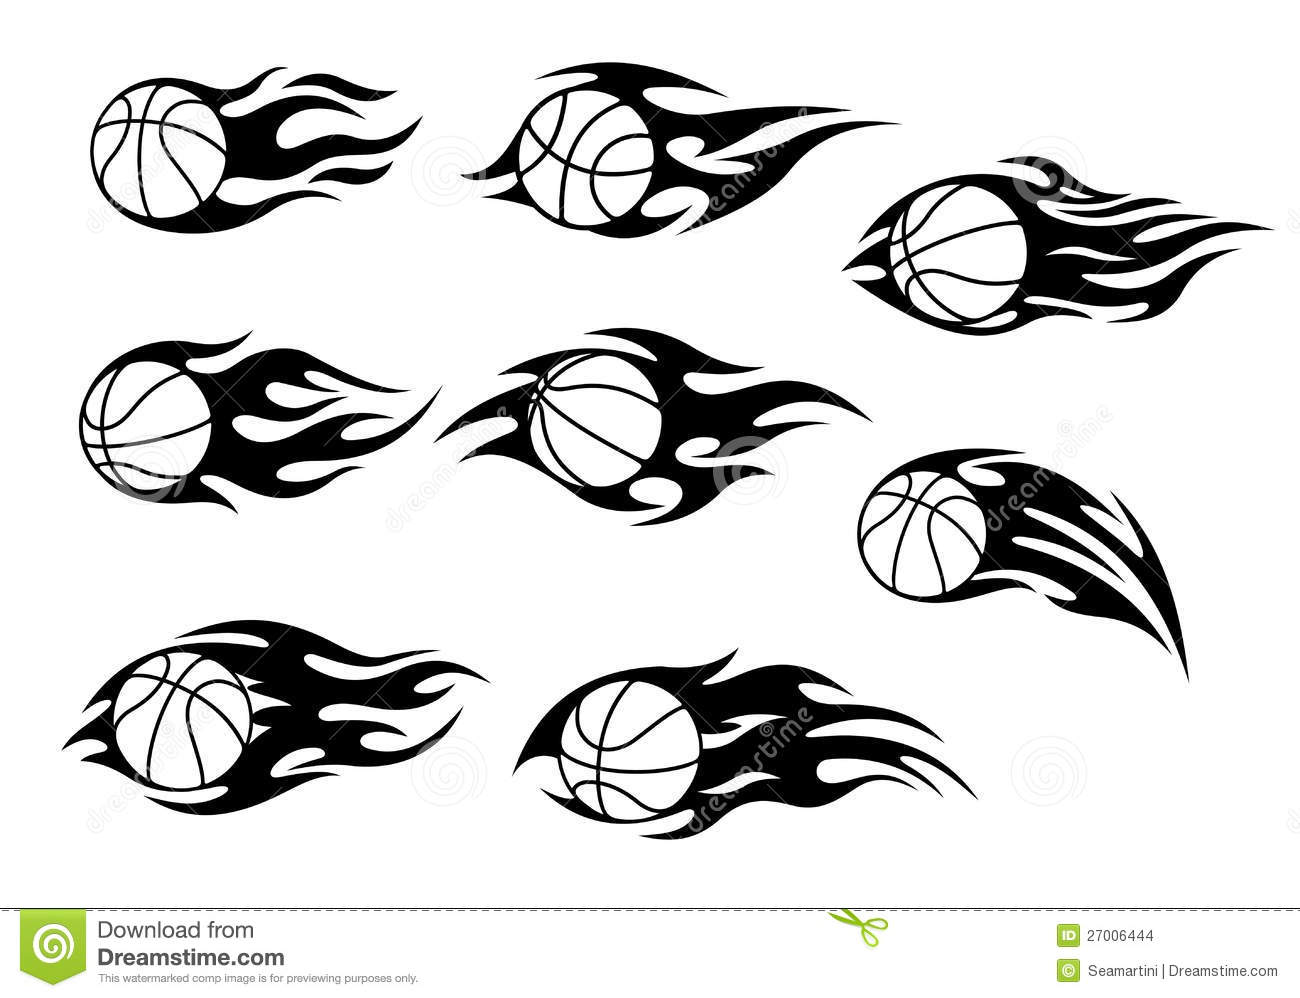 Basketball Balls With Fire Flames For Sport Tattoos Design